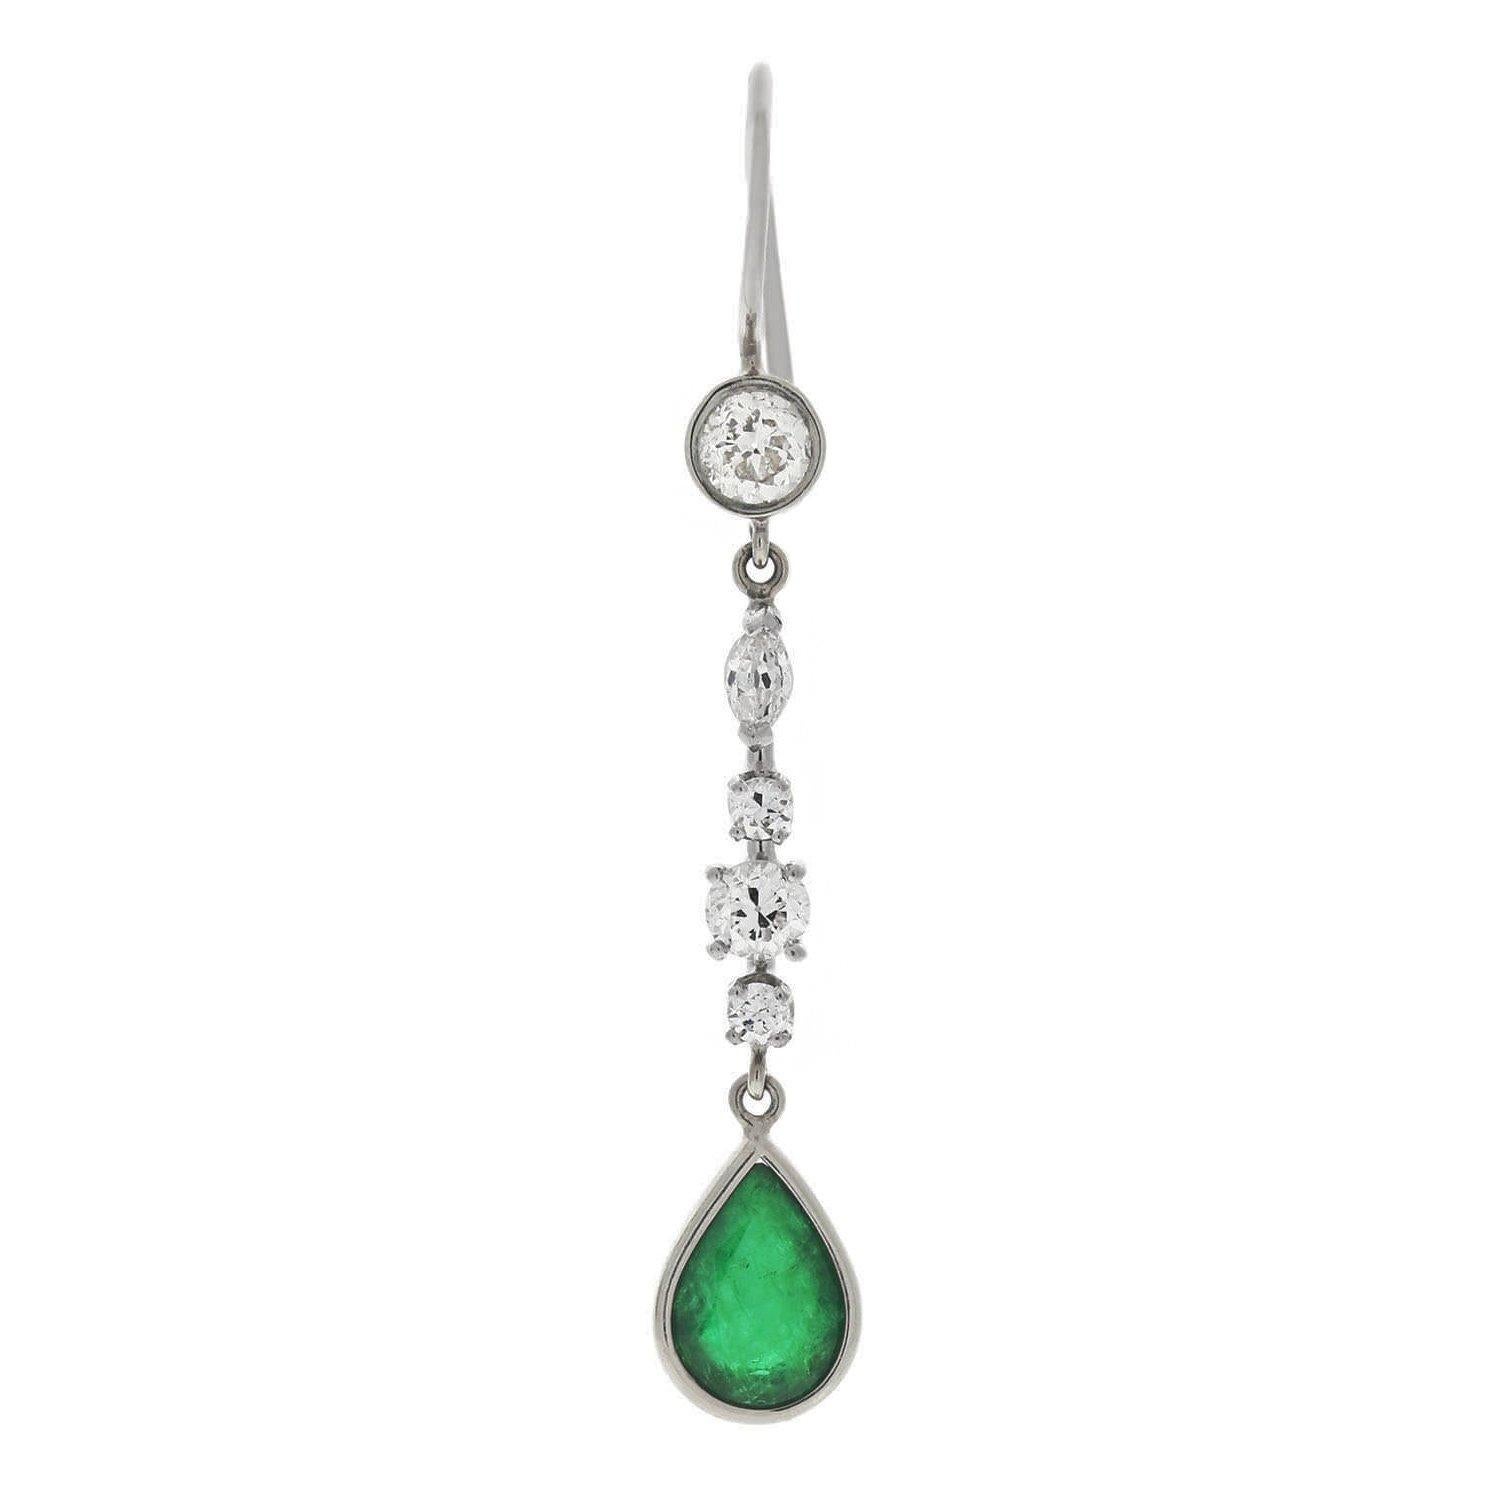 A stunning pair of dangling emerald and diamond earrings from the Retro (ca1940s) era! Crafted in 14kt white gold, these elegant earrings display a simple, yet beautiful drop design. Each earring begins with a gold earring wire attached to a single